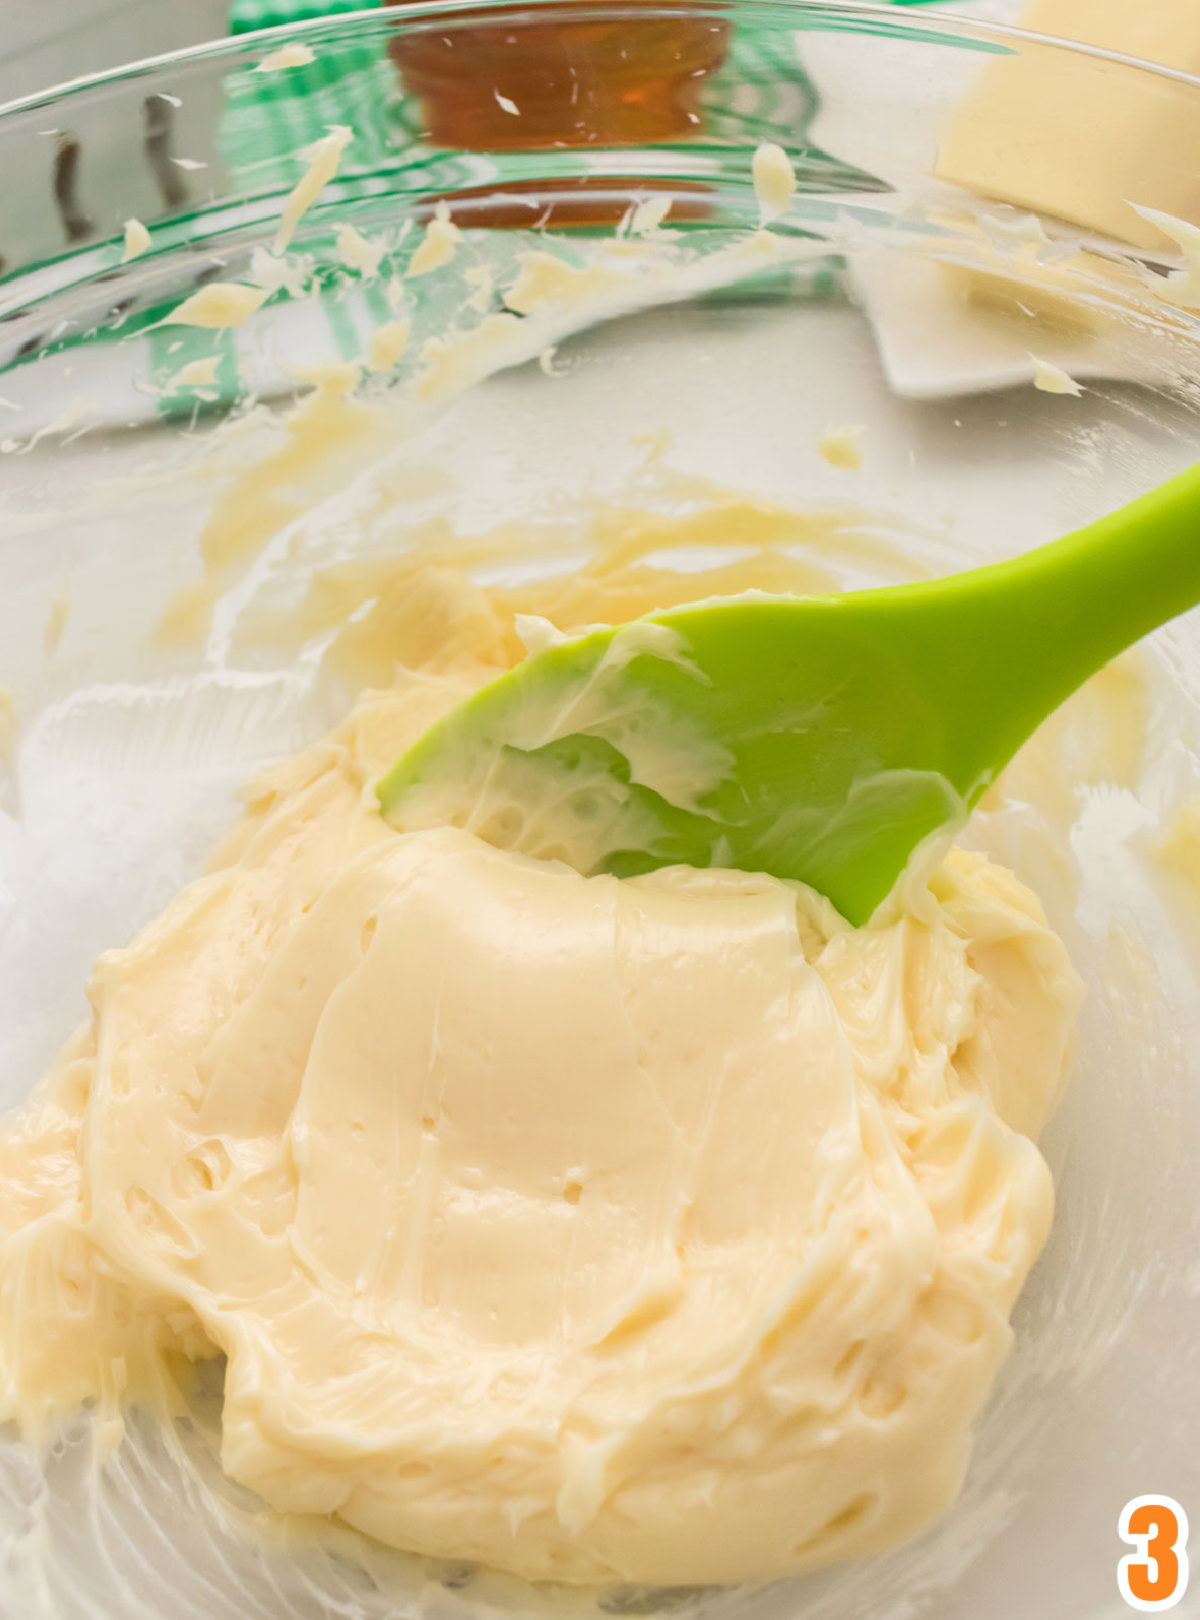 Closeup on a clear glass bowl filled with honey butter and a green spatula.